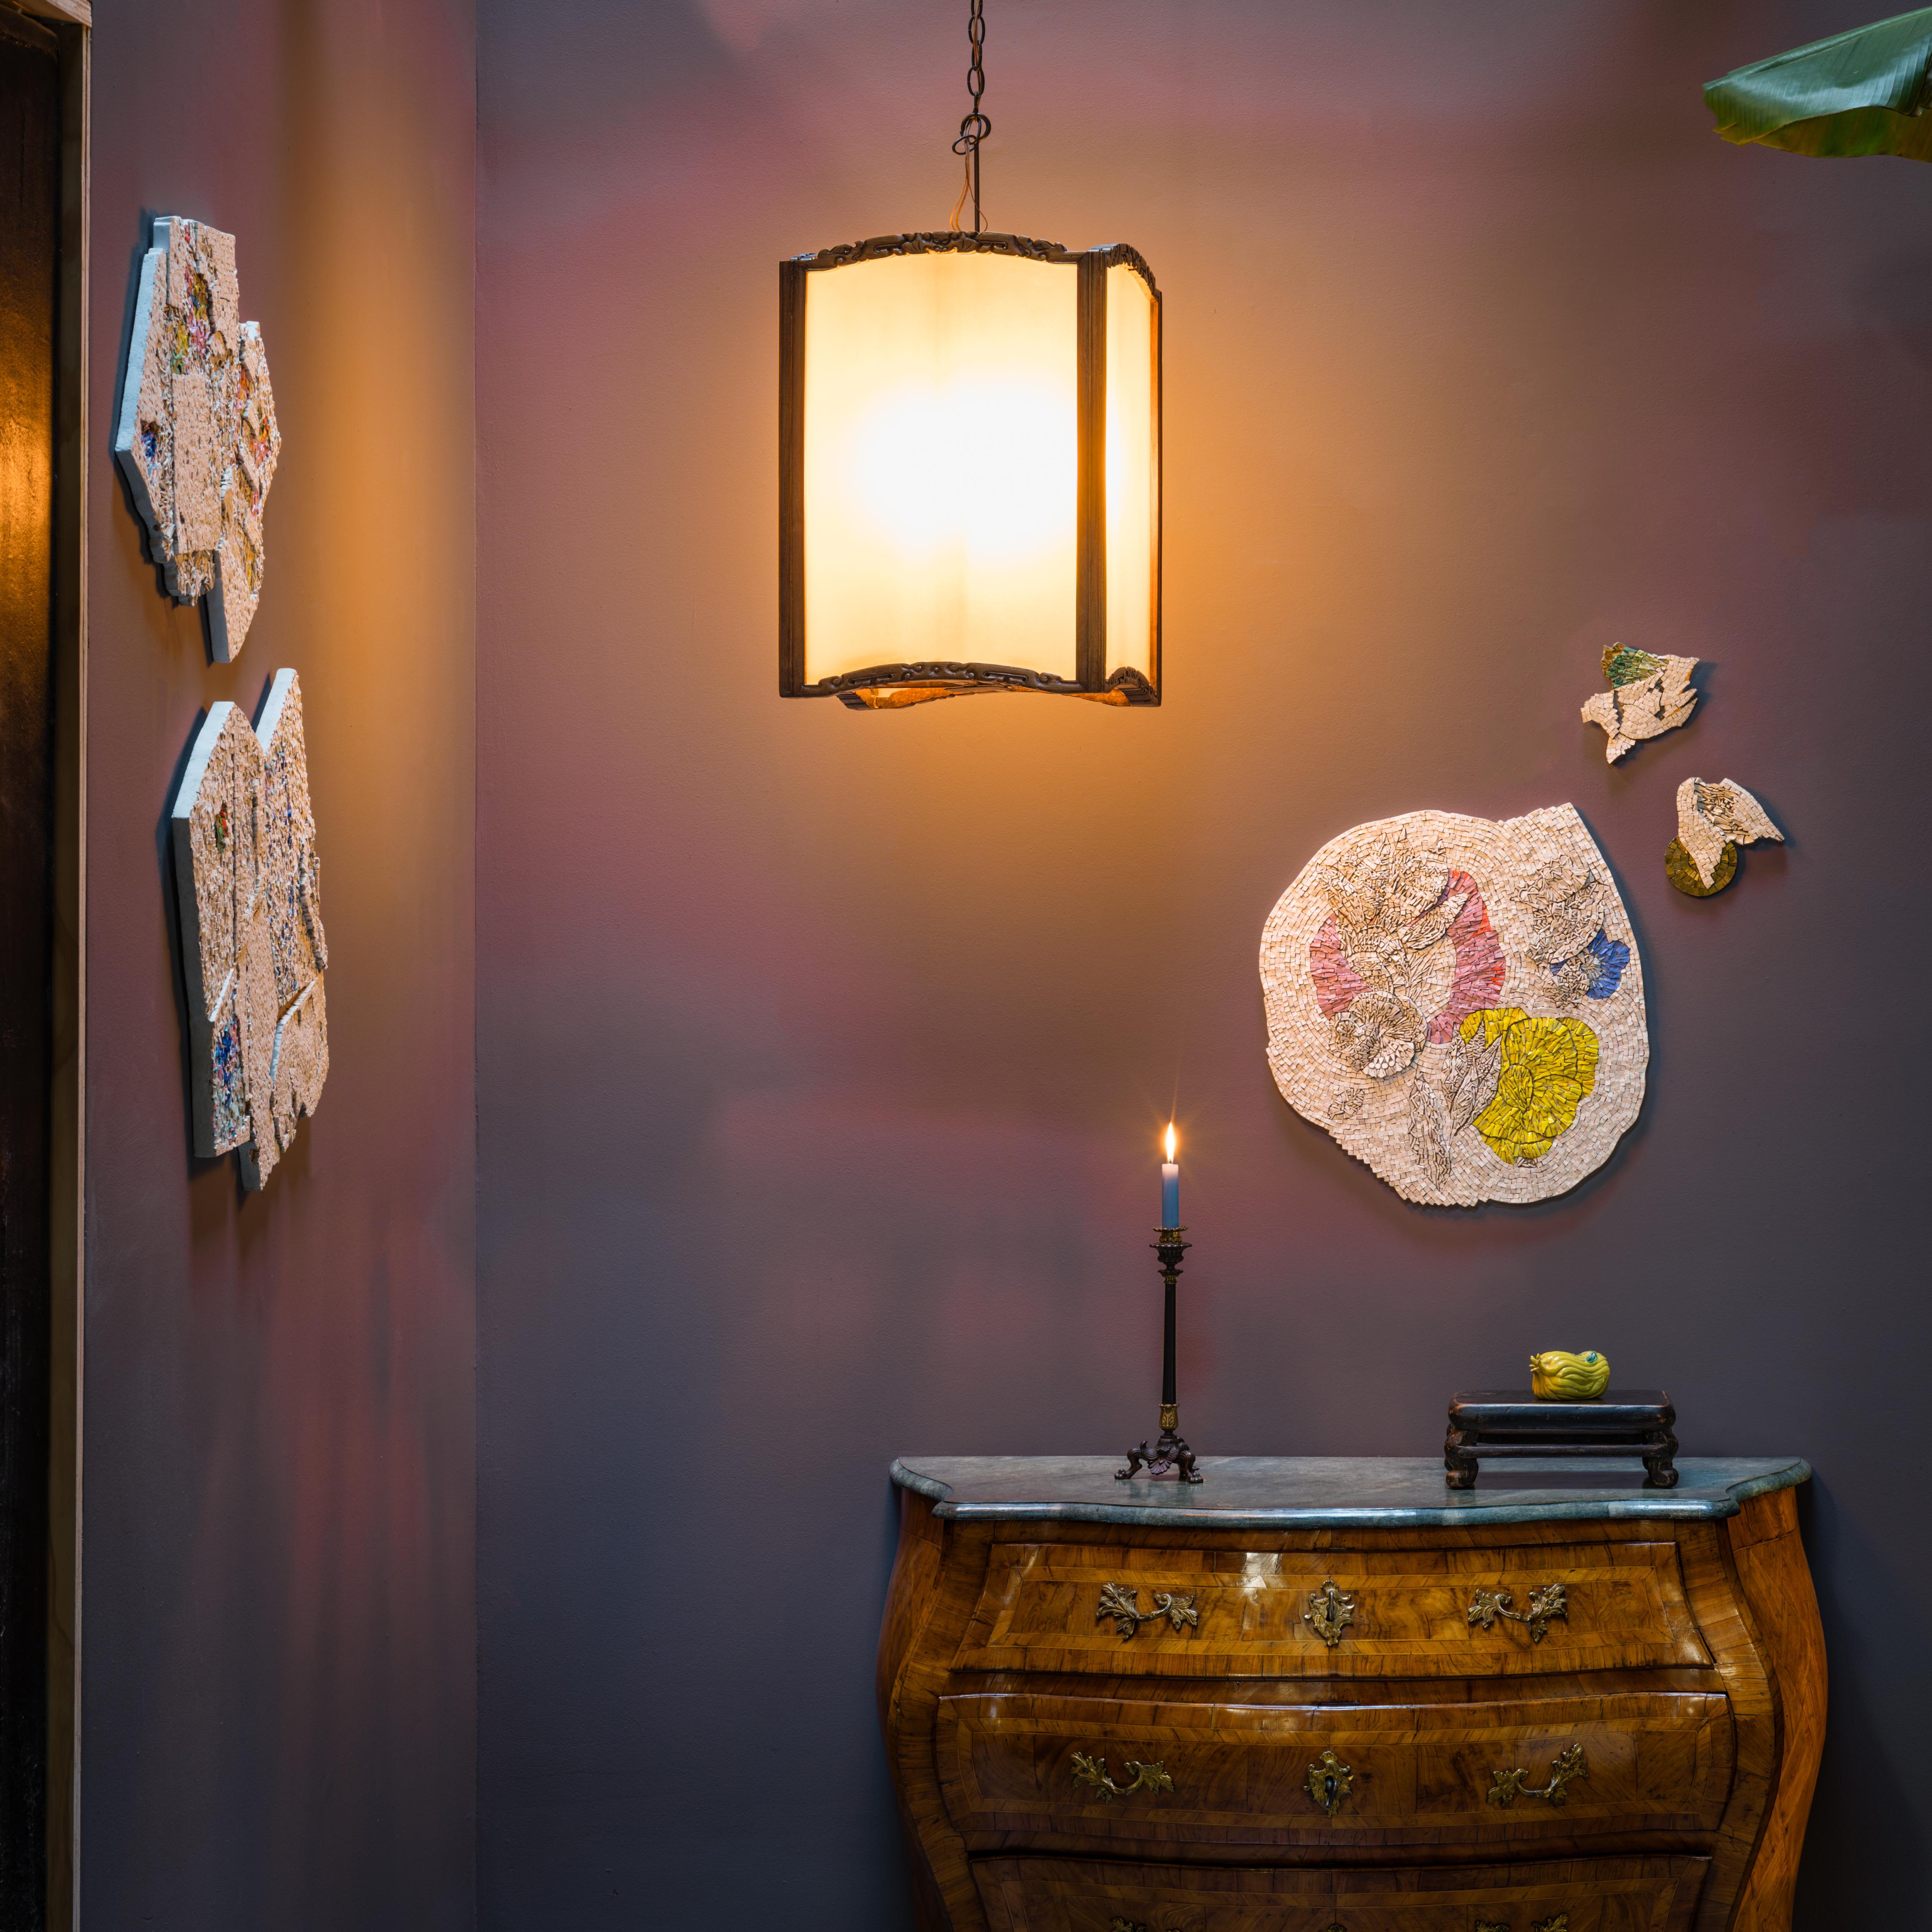 Framed in hand-carved rosewood, this 19th-century hanging lantern casts a soft glow through frosted glass. The lantern has a square frame, with straight sides and gently arched tops carved with abstract dragons and bats, symbols of strength and